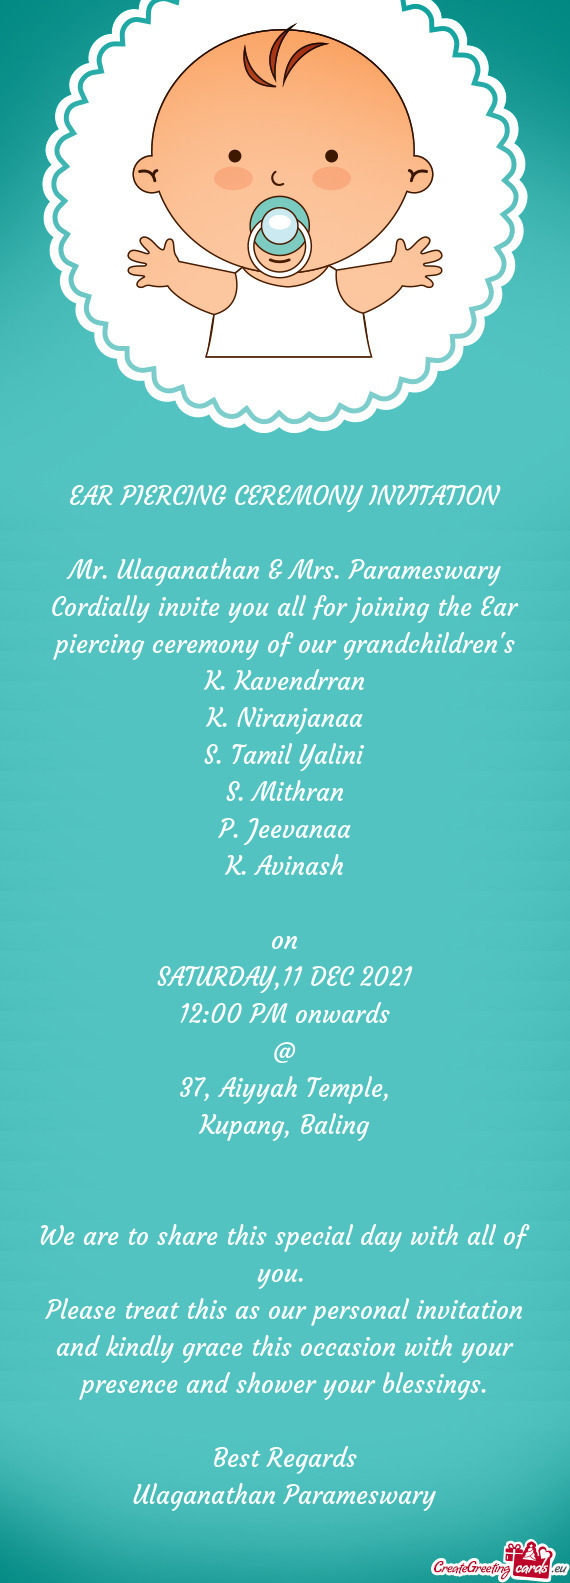 Mr. Ulaganathan & Mrs. Parameswary Cordially invite you all for joining the Ear piercing ceremony of